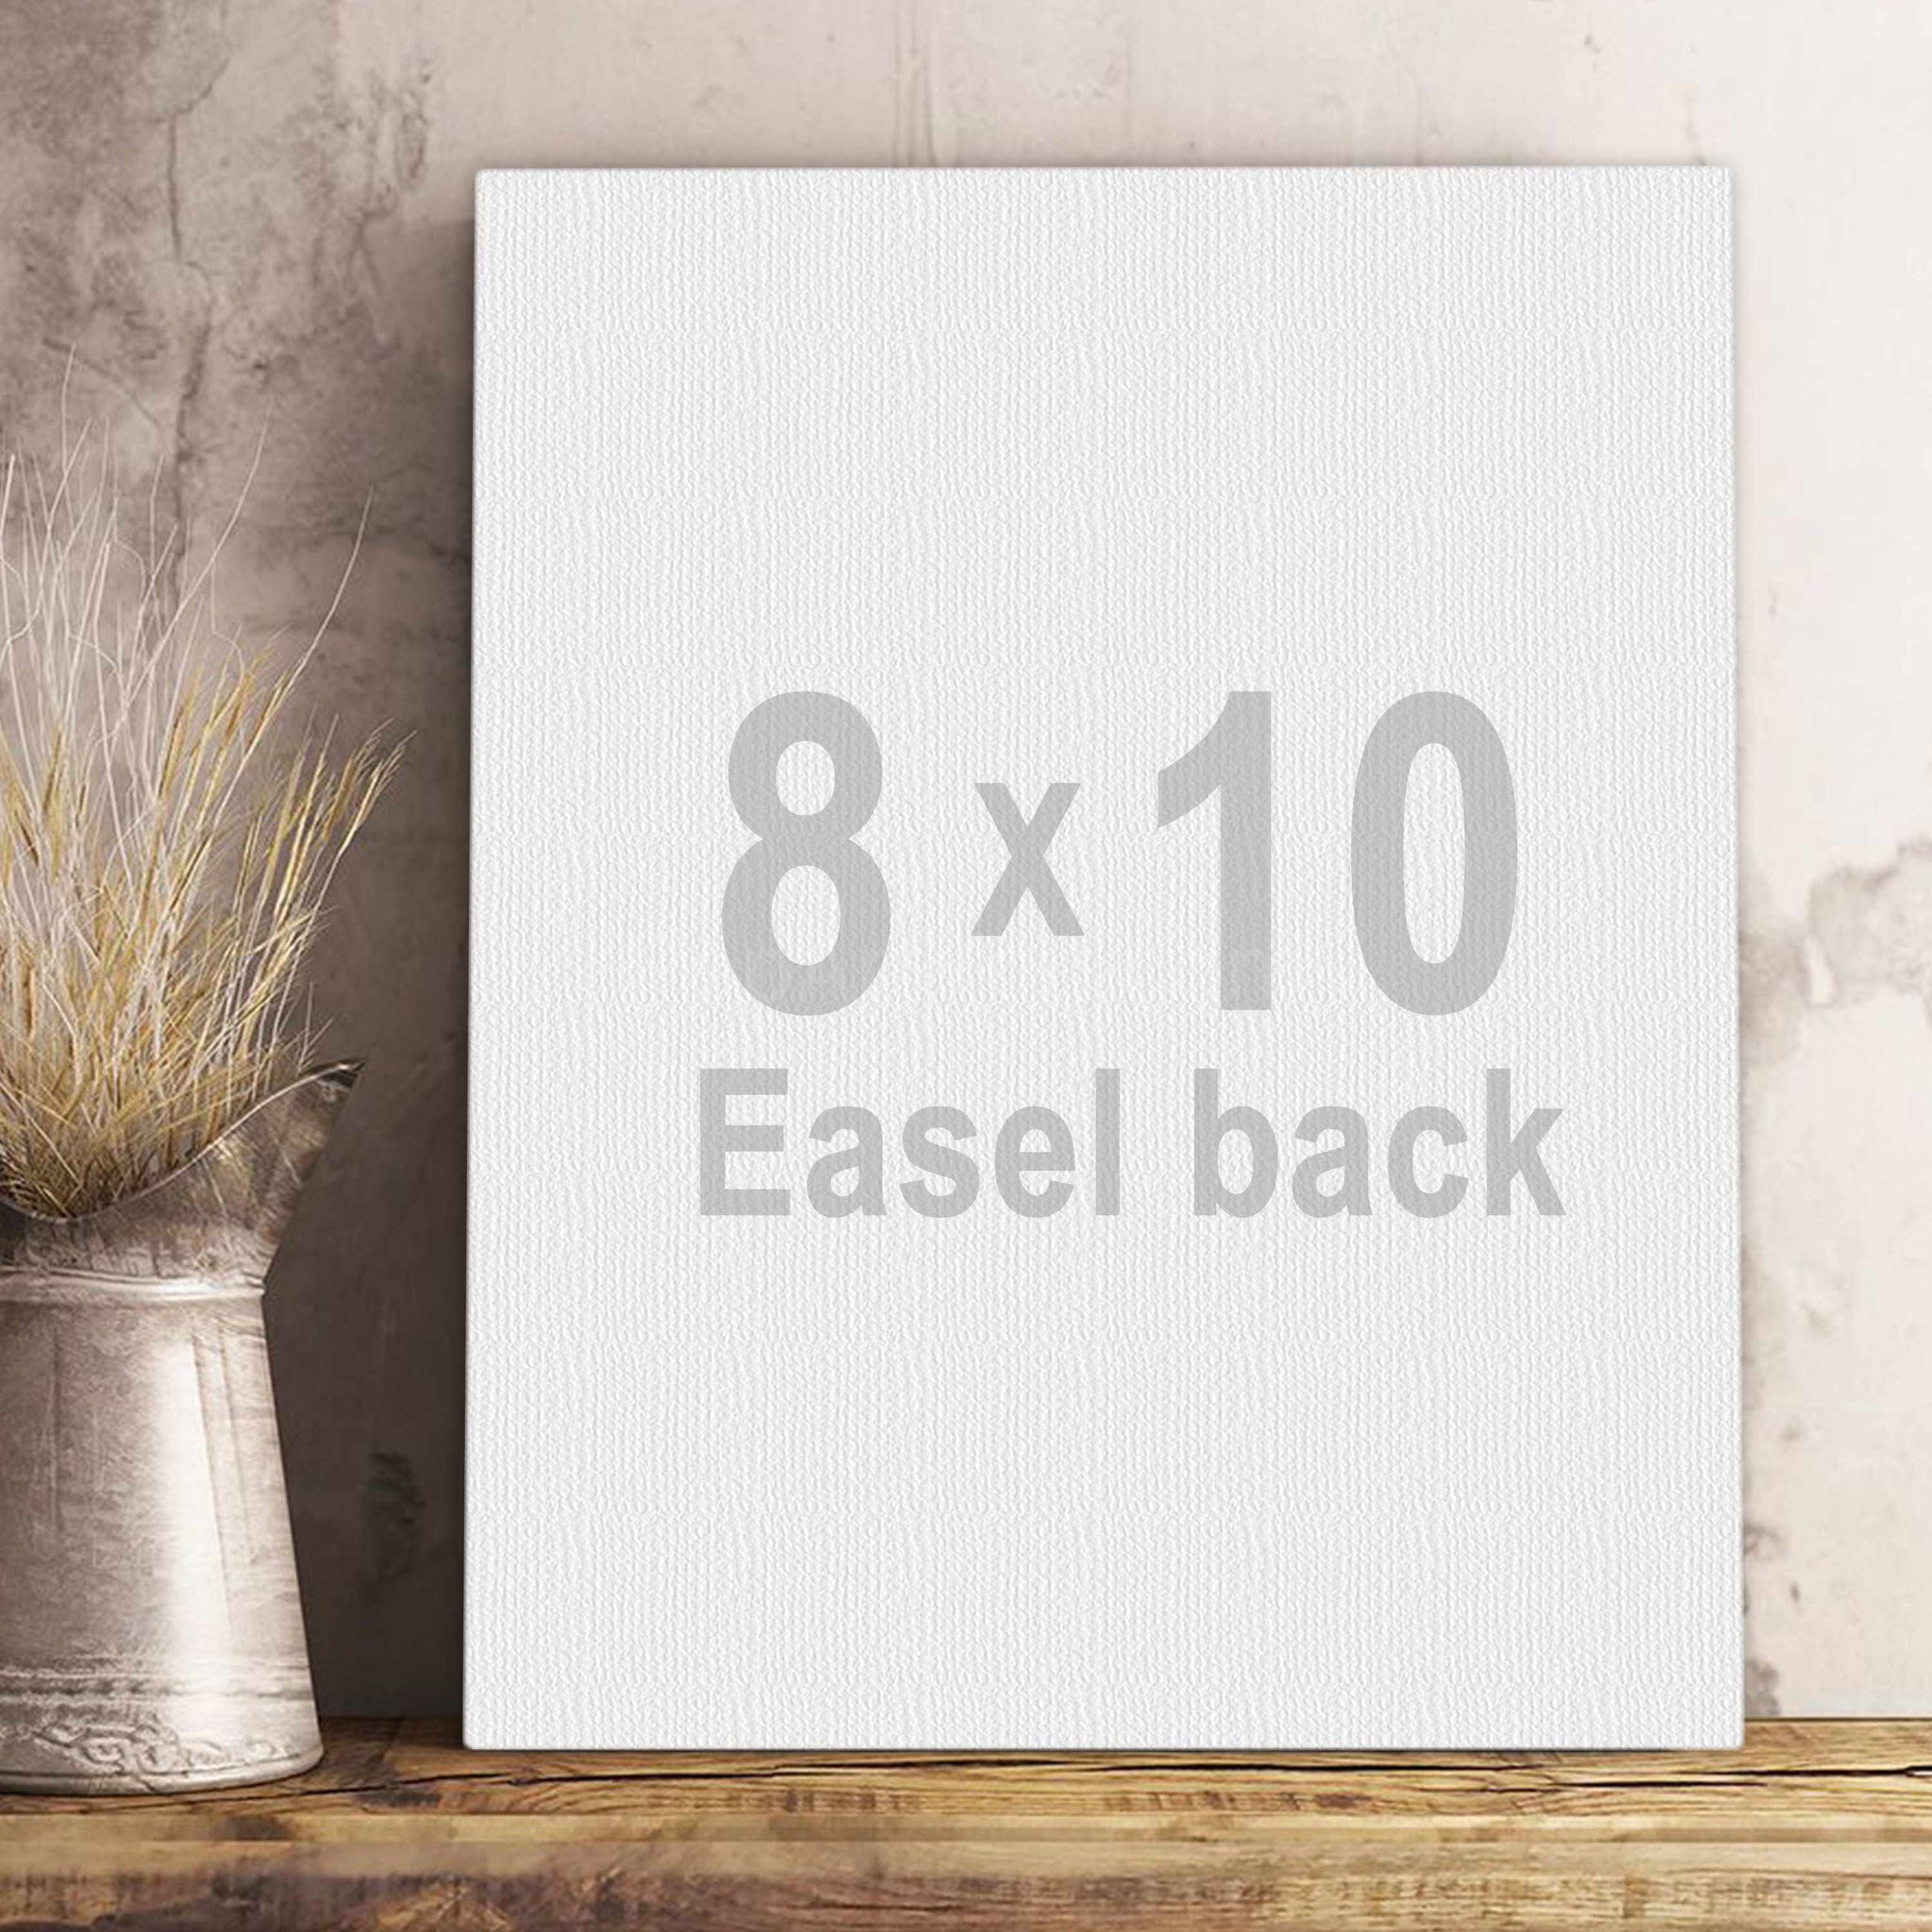 Easel back canvas 8x10 inches – PopArtYouShop